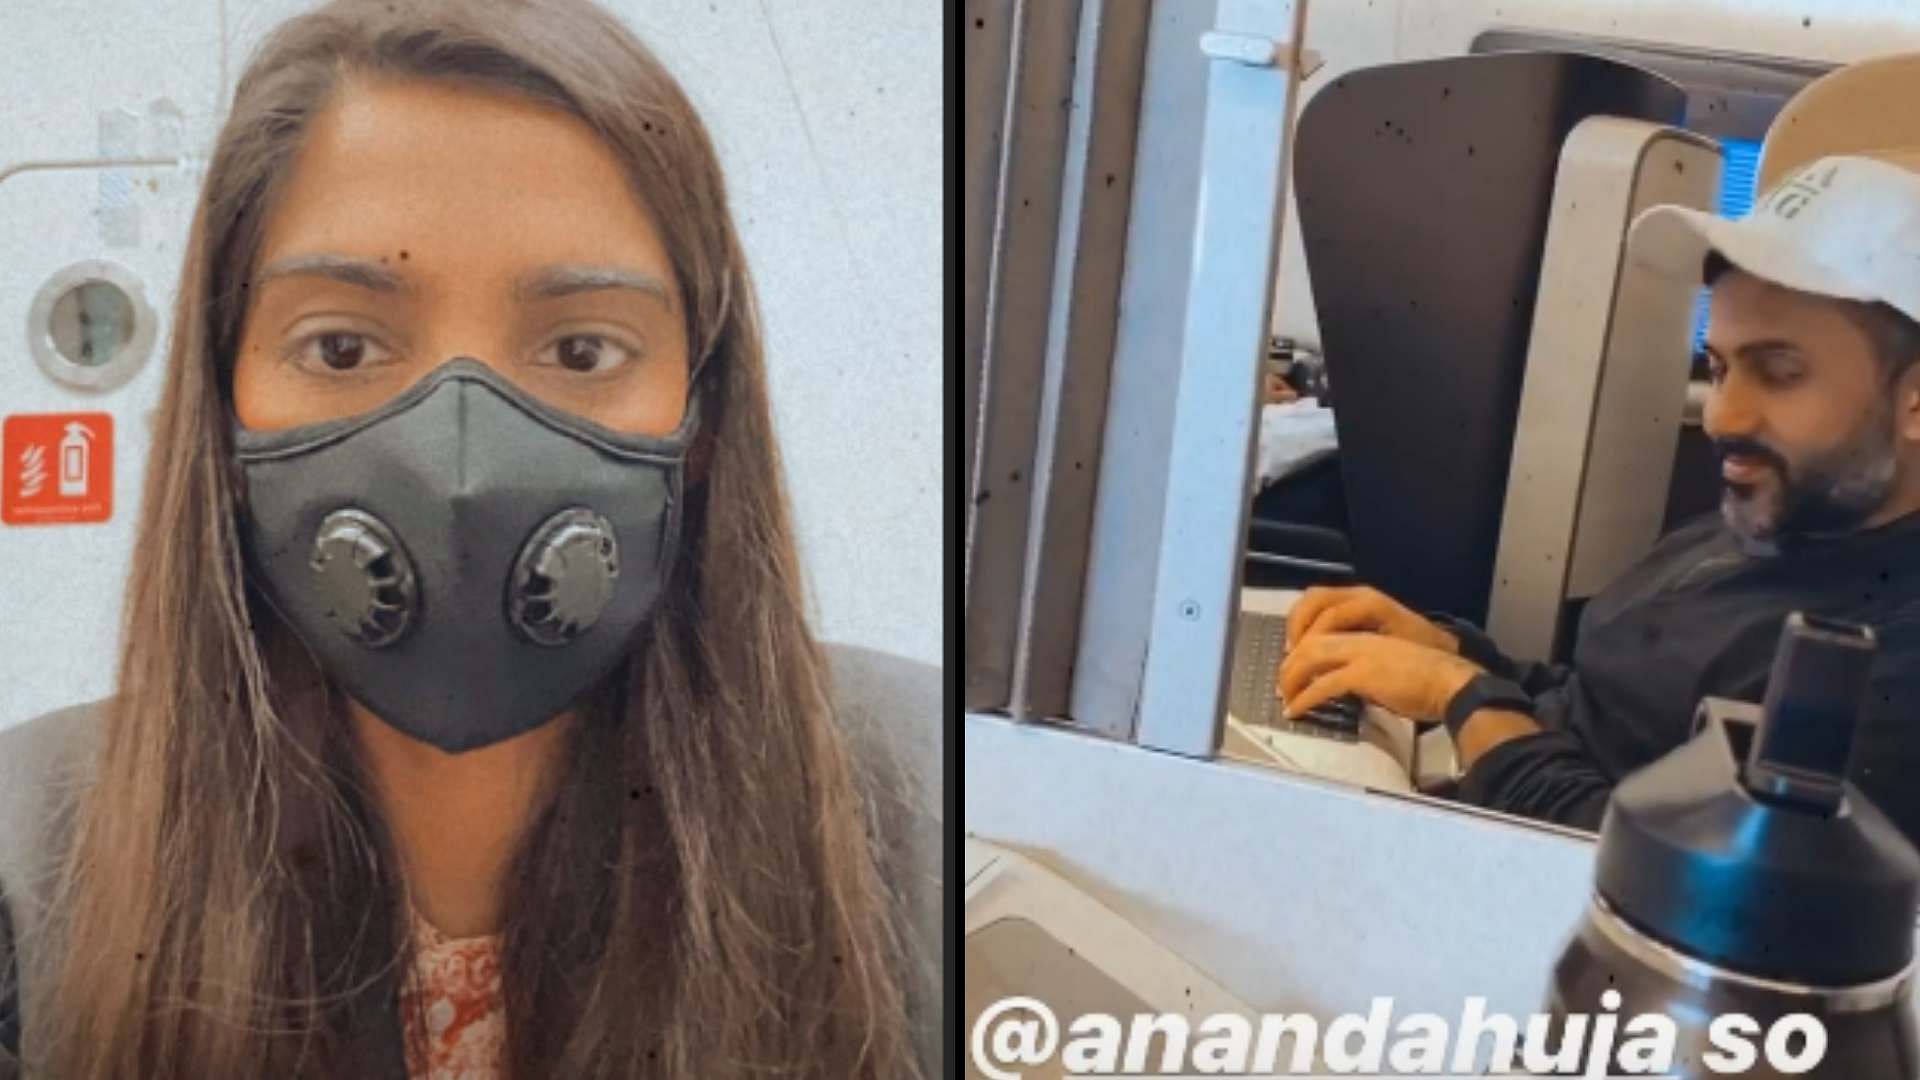 Sonam Kapoor and Anand Ahuja documented their experience travelling from London to Delhi amidst the coronavirus pandemic.